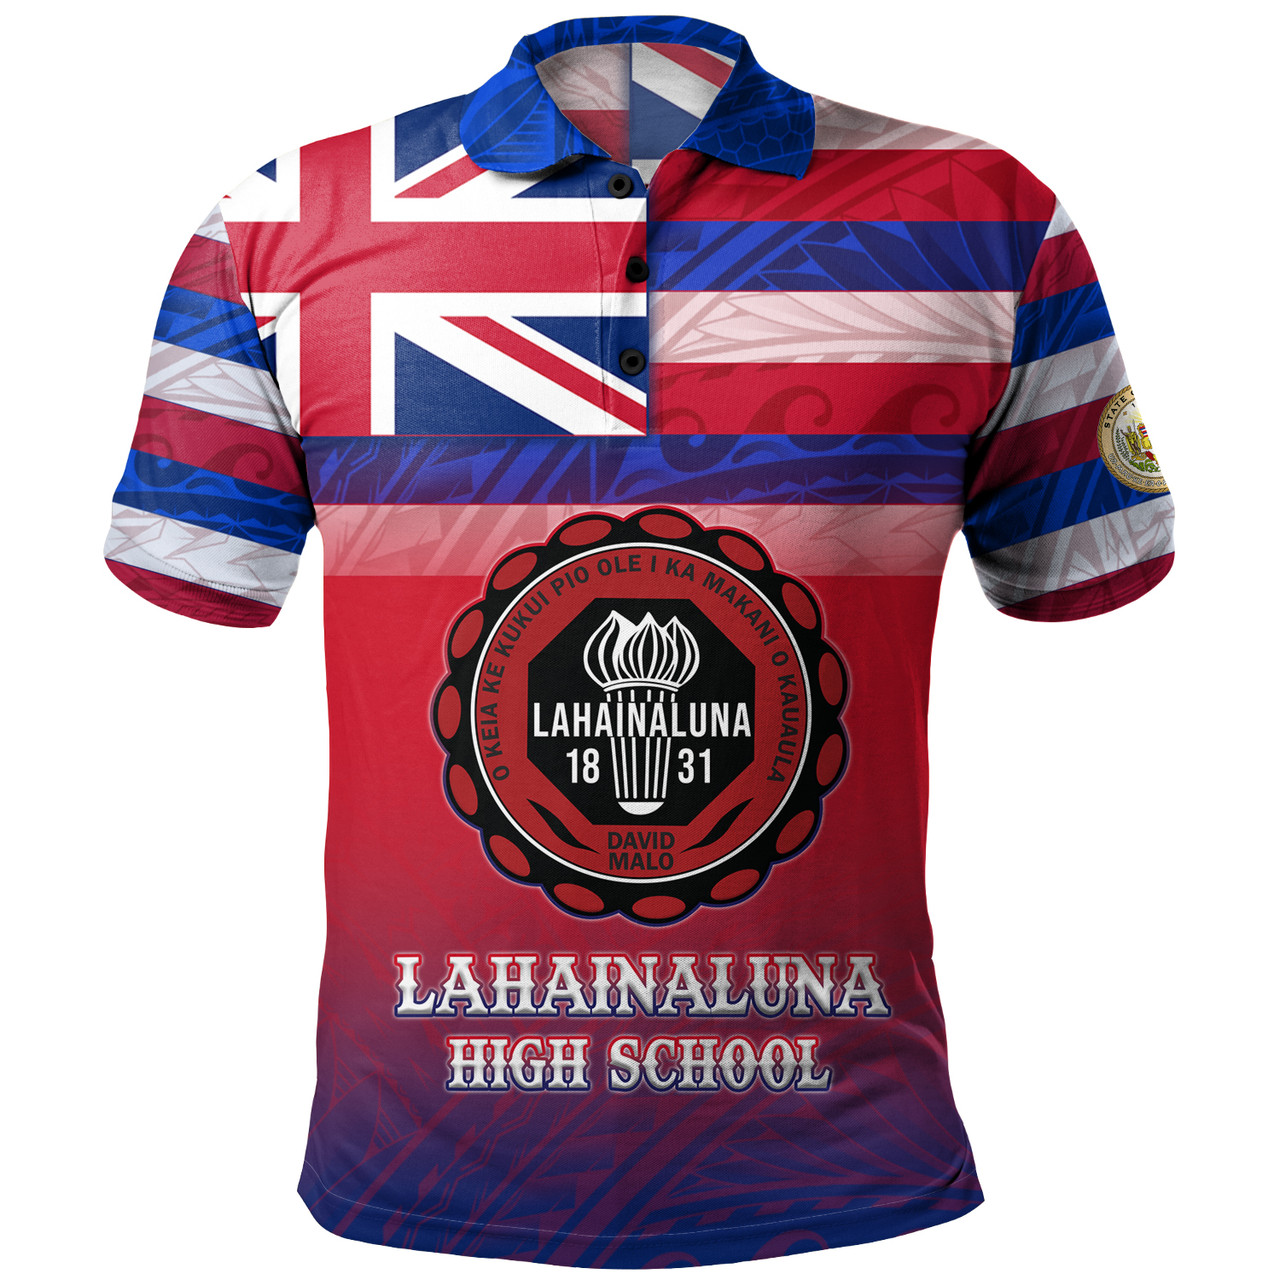 Hawaii Lahainaluna High School Polo Shirt Flag Color With Traditional Patterns